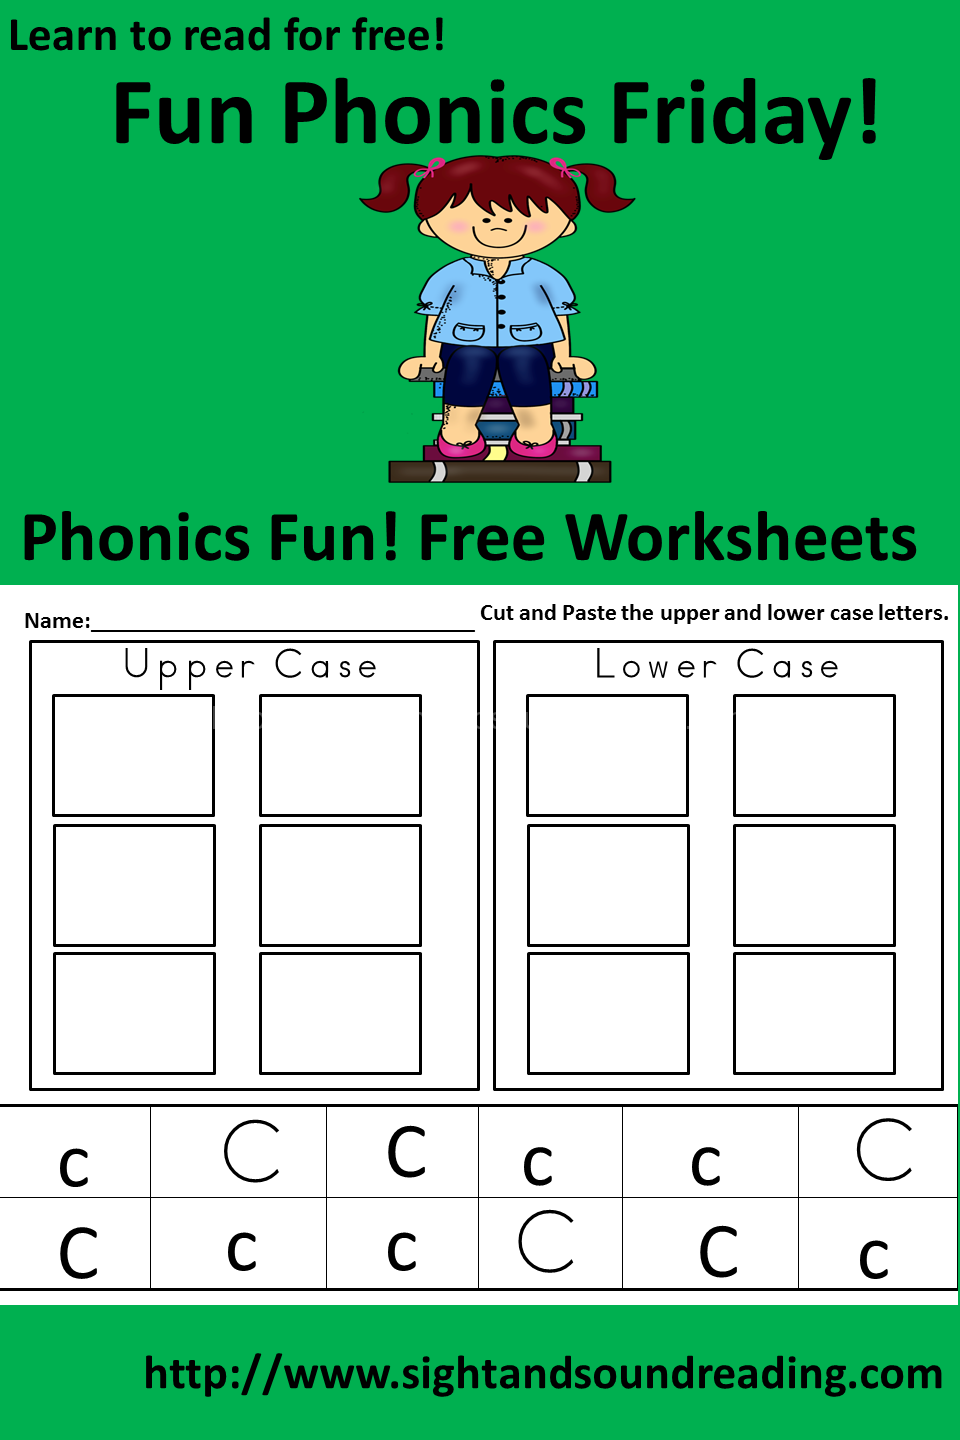 Free Phonics Friday -The Letter Cc | Mrs. Karle's Sight and Sound Reading